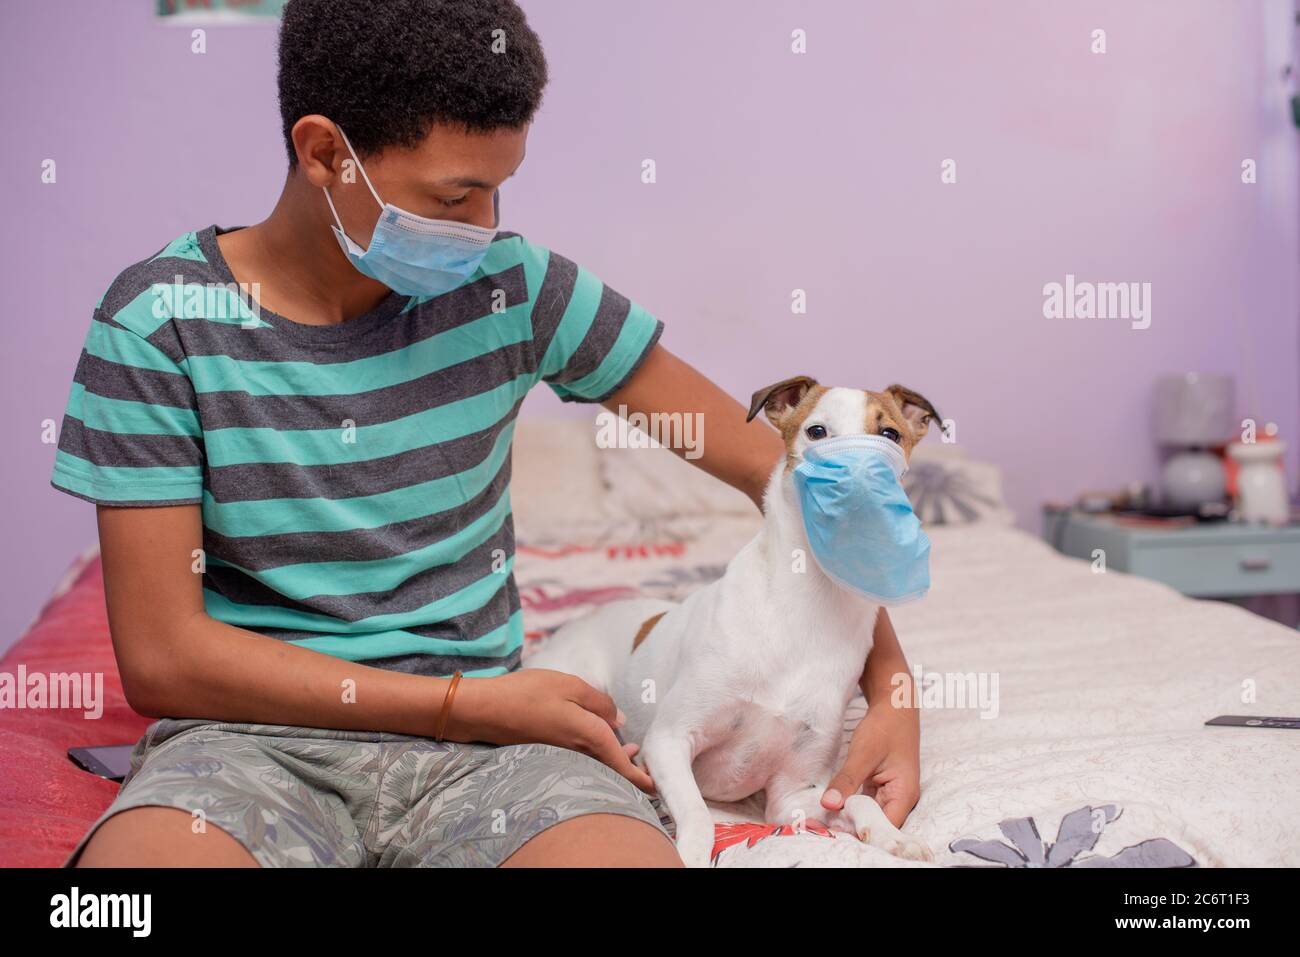 Young boy and his pet sitting on bed Stock Photo